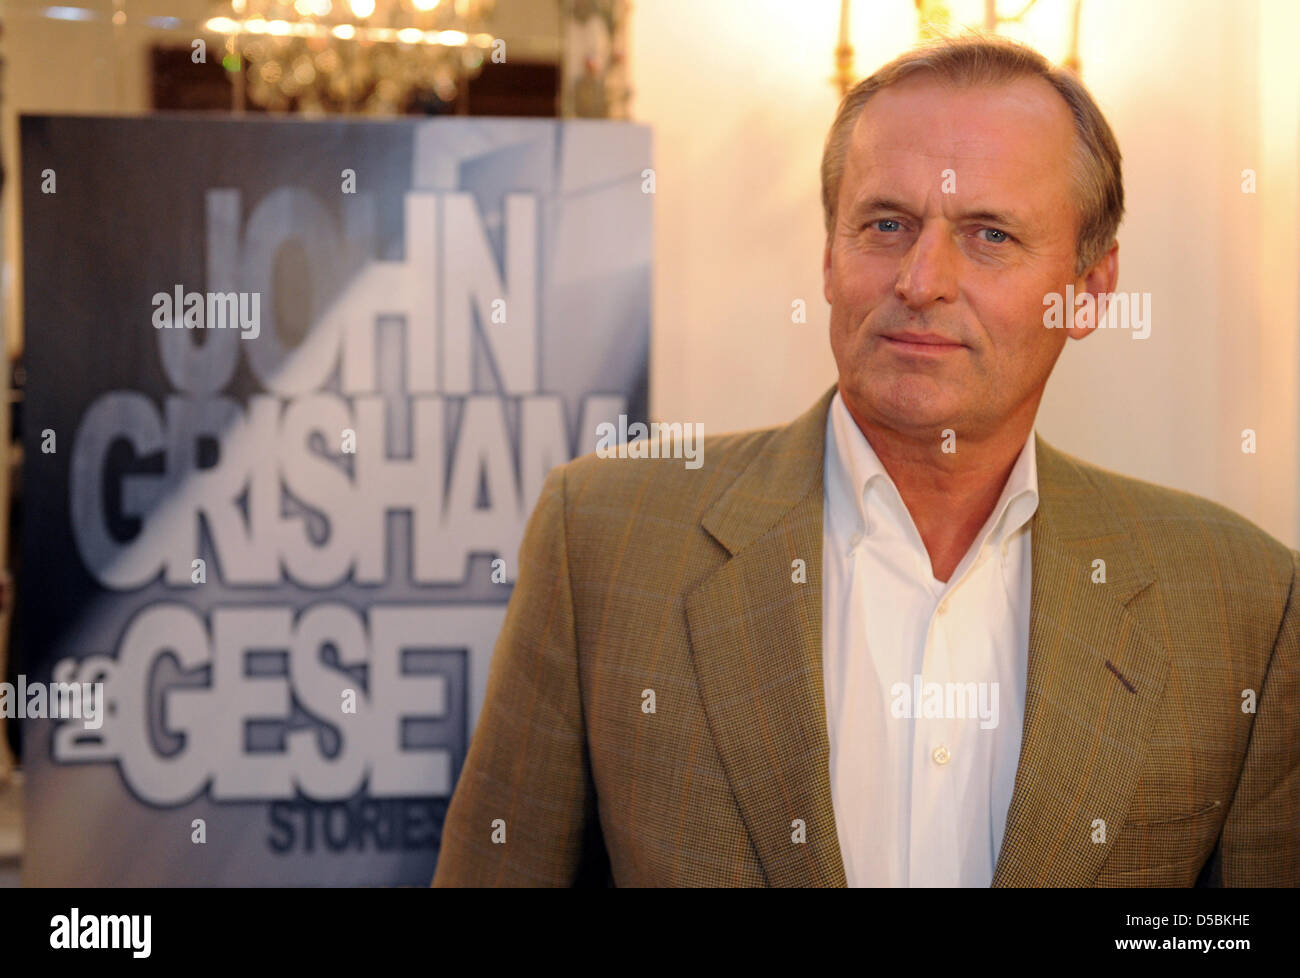 US writer John Grisham presents his new book 'Ford County' (German: Das Gesetz) during a press conference in Hamburg, Germany, 09 September 2010.    The bestseller author embarked on a reading tour in Germany for the first time, to introduce his book 'Ford County', which contains short stories. Photo: Marcus Brandt Stock Photo